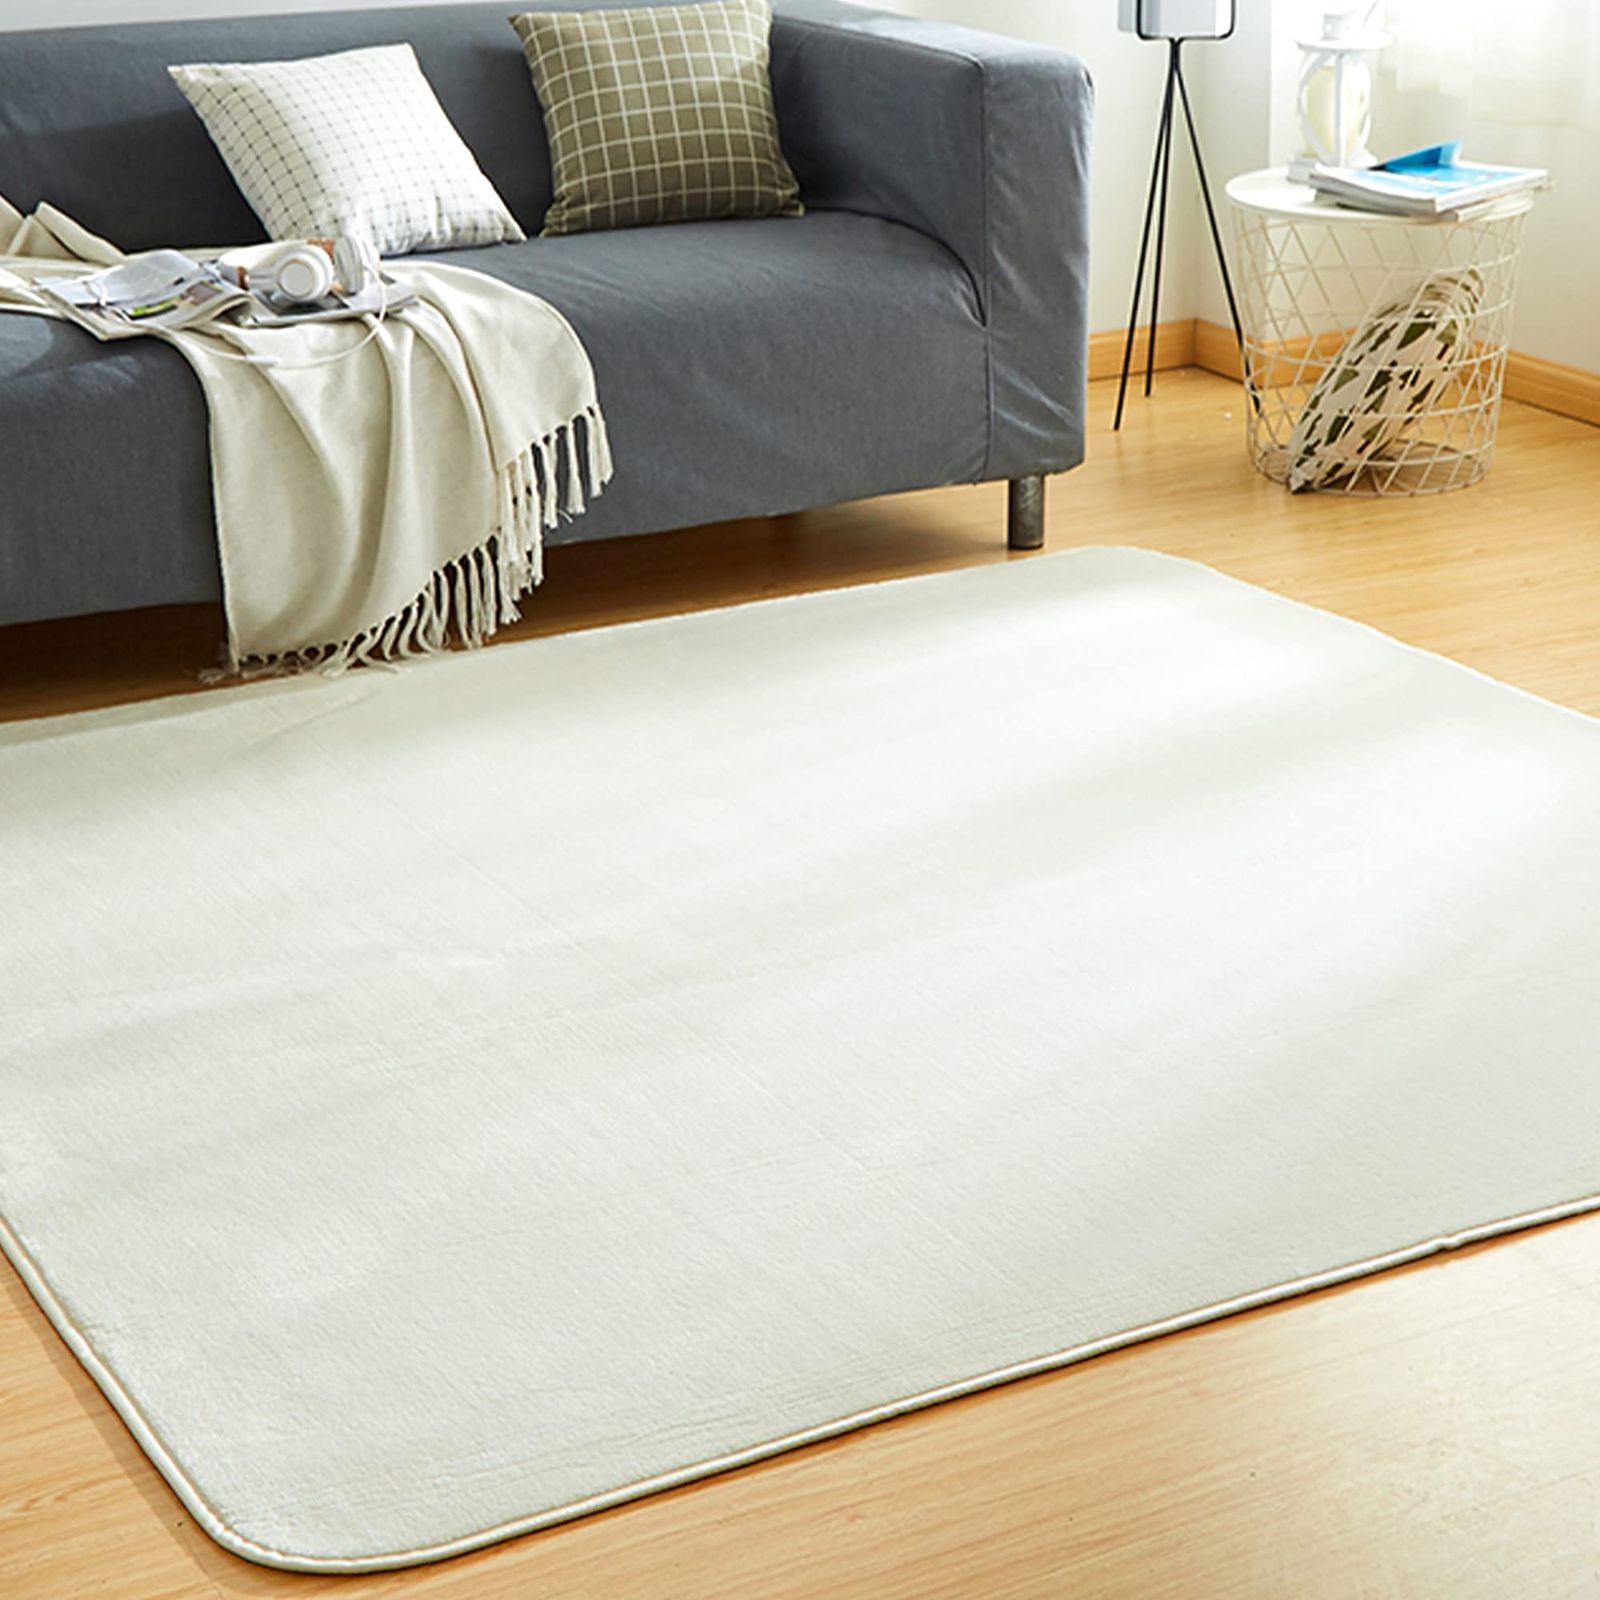 商品情報商品の説明Easy to clean in small piles. Moderate hair length for a perfectly fluffy feeling. Not even Pomeranian fur will get caught in this rug and it’s easy to run a vacuum cleaner over.Can be removed just with light rolling. Don’t you want to simply change the image of your room? Simply place down the rug/carpet and your whole room will look transformed. Safe & Secure The underside has non-slip spots that prevents slippage.Safe for your entire family, including children and the elderly. Fluffy and Soft to the Touch Delicate fibers project from the surface for a soft and flexible feel, and is resilient, warm, and durable yet smooth, making it suitable for all seasons. Please Note: Avoid direct sunlight after washing and set it in a well ventilated place to dry. Please Note: Packaging materials are as simple as possible to guarantee low prices.Because the product is inflated within the packaging, be careful not to cut the product along with the packaging when opening it. The product will be wrinkled upon arrival, but they will gradually smooth out over time. If the smell bothers you upon opening, please let it dry in the shade, in a well-ventilated spot.主な仕様 【安心】防ダニ・抗菌・防臭仕様、滑り止め加工　裏にポツポツの滑り止めが付いてたのでズレにくい、フローリングでも使用できます。お子様やペット、年配の方がいるご家庭にも安心です。br【簡単に掃除】水洗いや洗濯機もサポートします。洗濯機を使用するときに、お洗濯用ネットの使用をおすすめします。掃除機で掃除することができます。適度な毛足の長さで、ゴミやほこりが絡まりにくい、掃除が簡単です。いつでも清潔、快適にお使いいただけます。br【機能】極細繊維のマイクロファイバーを使った、ふわふわ柔らかな肌触り、通気性が高いです。カーペットが軽量で折り畳み可能、簡単に持ち運びできます。防音効果もあります。br【素材】表地：フランネル　中材：ウレタンフォーム　裏地：ノンスリップ不織布 【オールシーズン】夏は冷房対策、冬はホットカーペット・床暖房などに対応できます。br※商品輸送の際に折りたたんでお届けするため、開封時に折りジワ、歪み・寸法不足等の変形がありますが、一週間ほどご使用になれば、ゆっくりと回復します。製品サイズに個体差があるため表記サイズより1〜3％の誤差がある場合がございます。